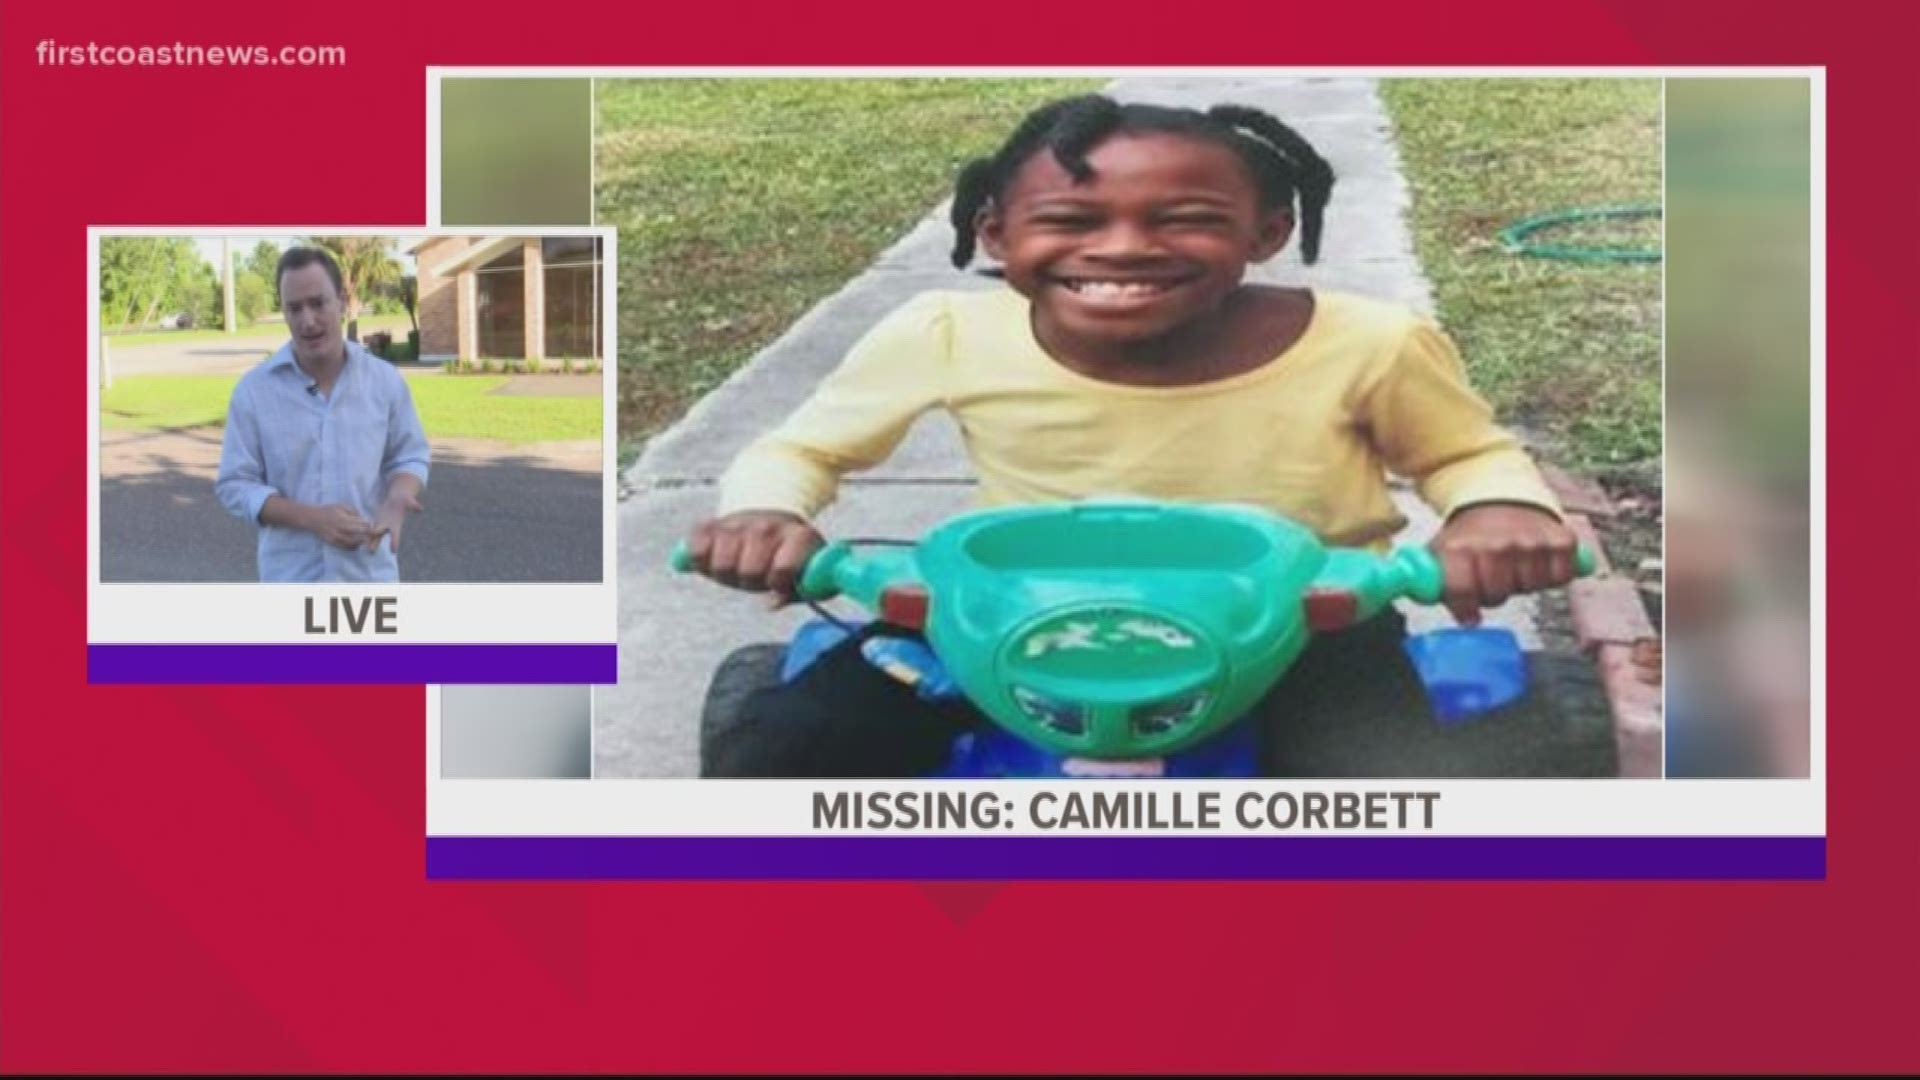 A statewide search was issued for 9-year-old Camille Corbett, who was last seen on Jacksonville's northside.